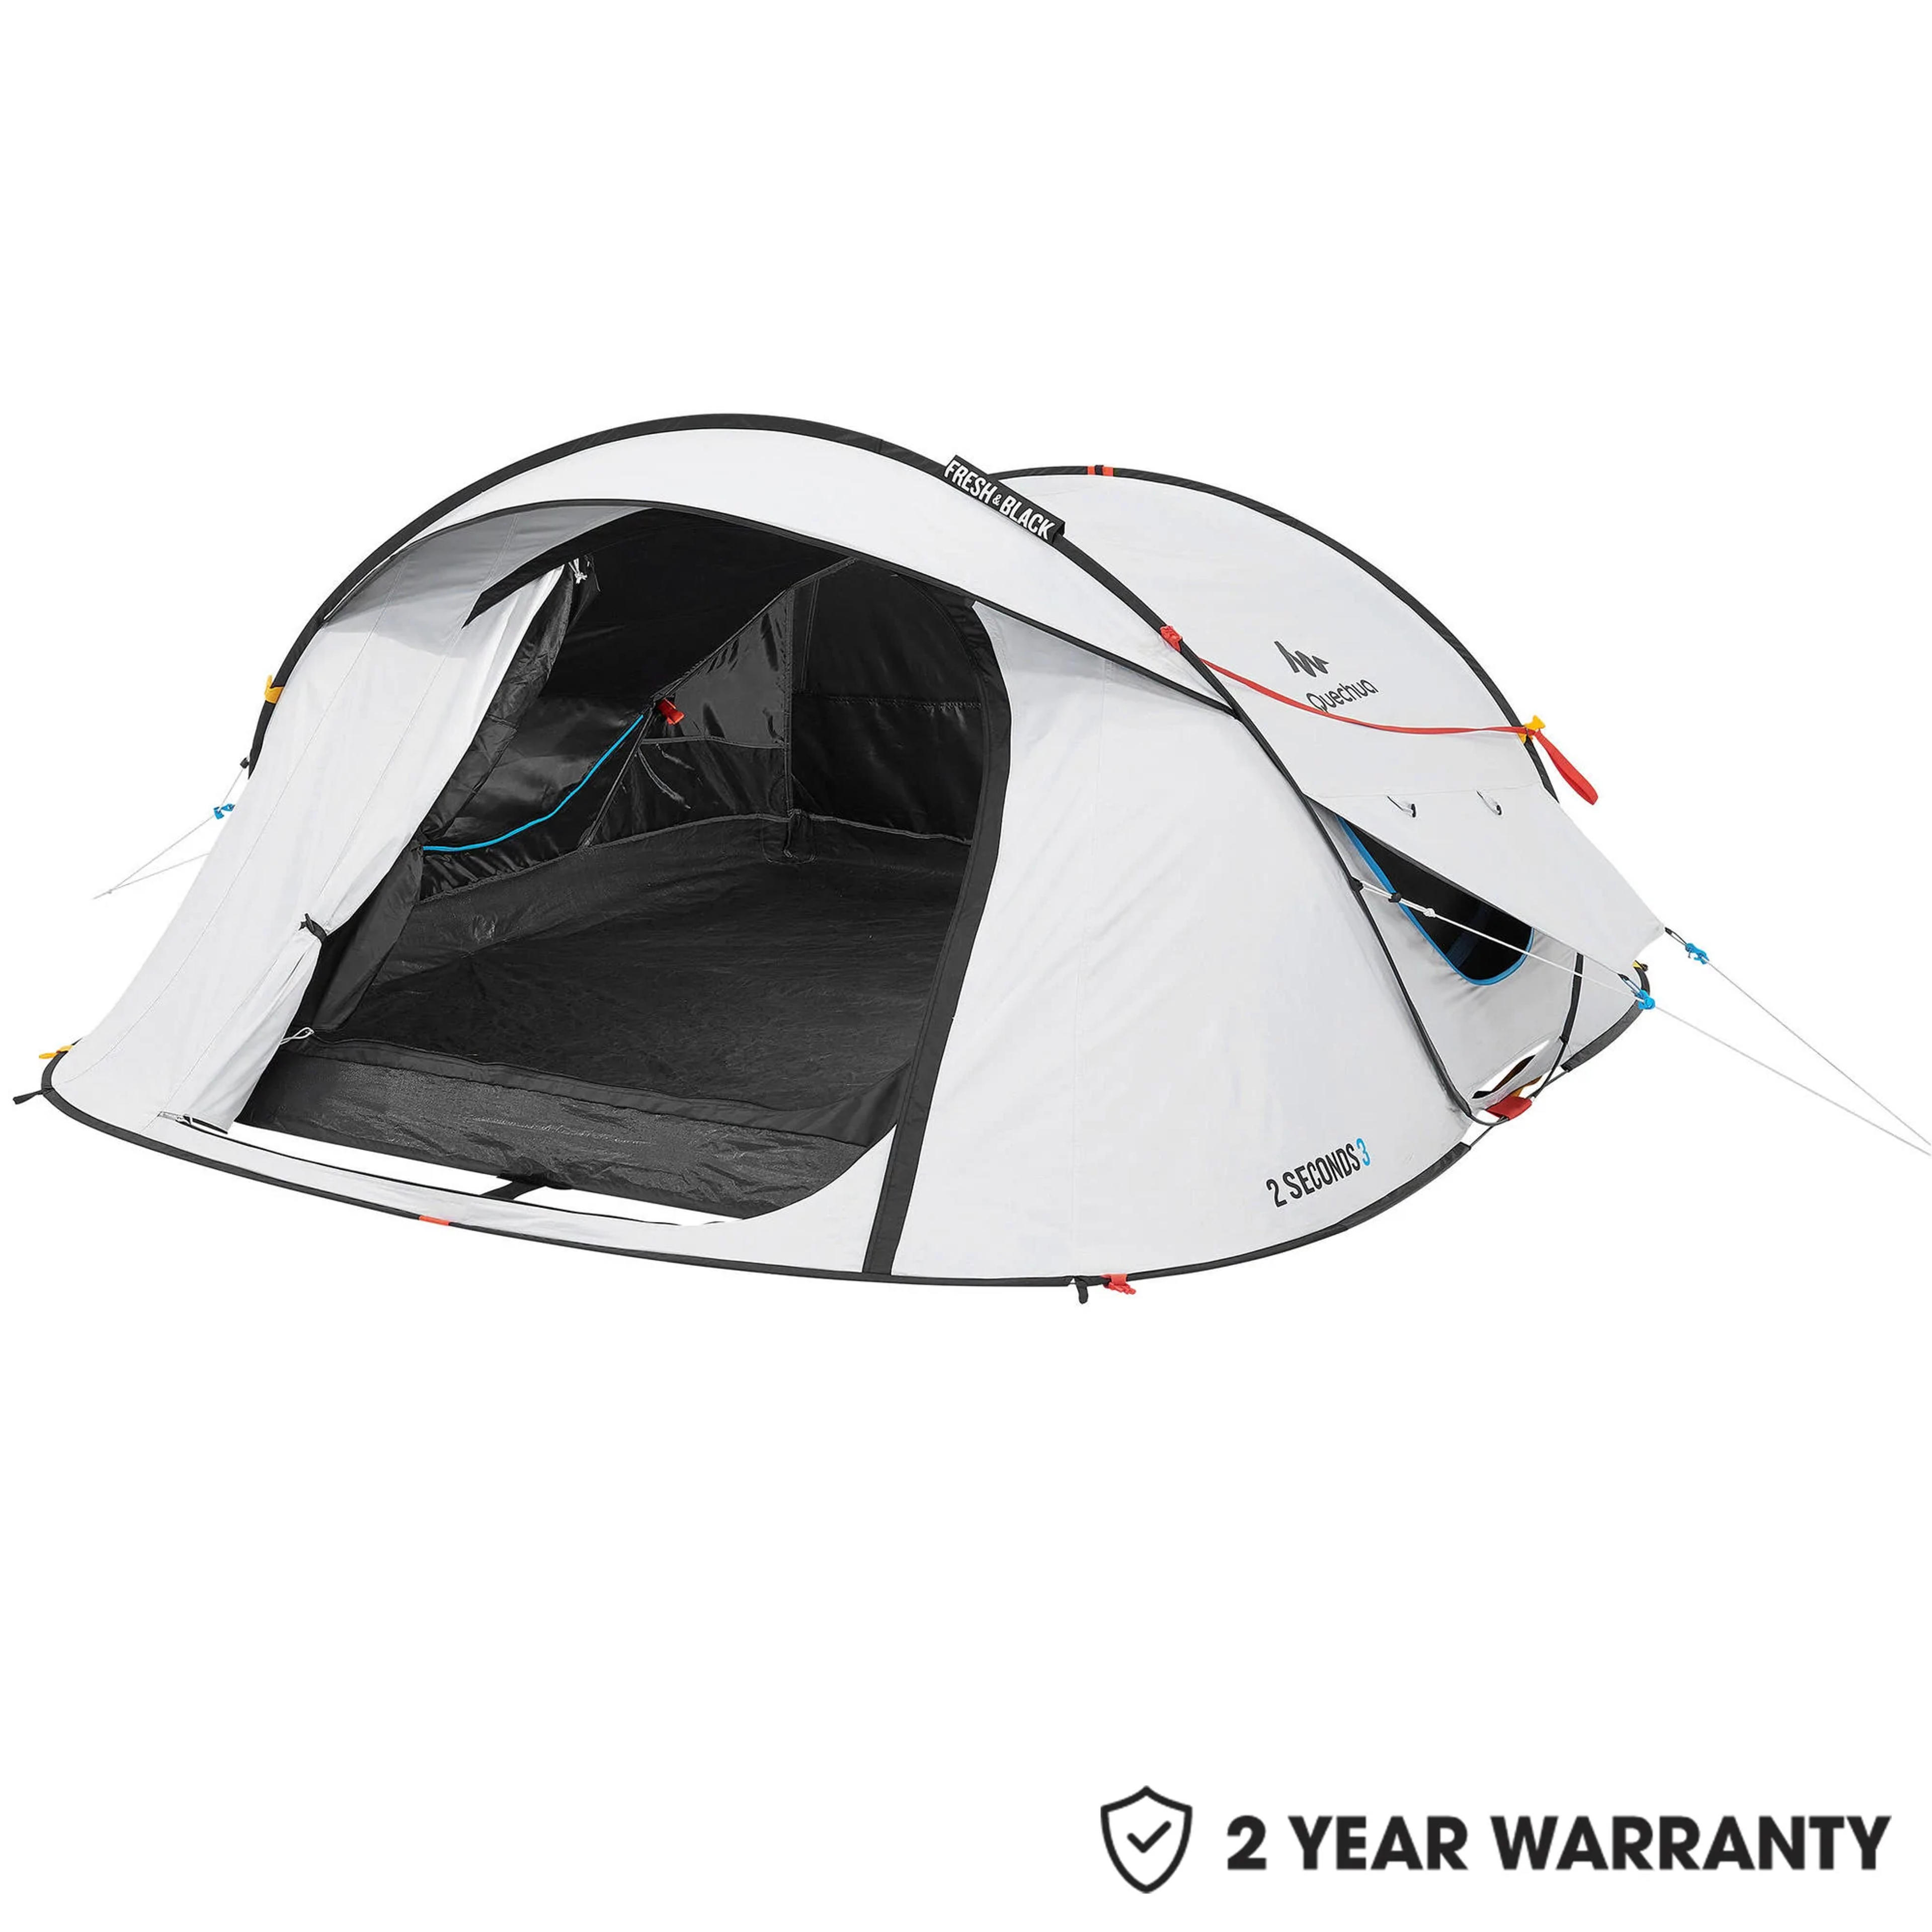 Quechua 2 Second Fresh & Black, Waterproof Pop Up Camping Tent, 3 Person - Snowy White / 3 Person / 8505871